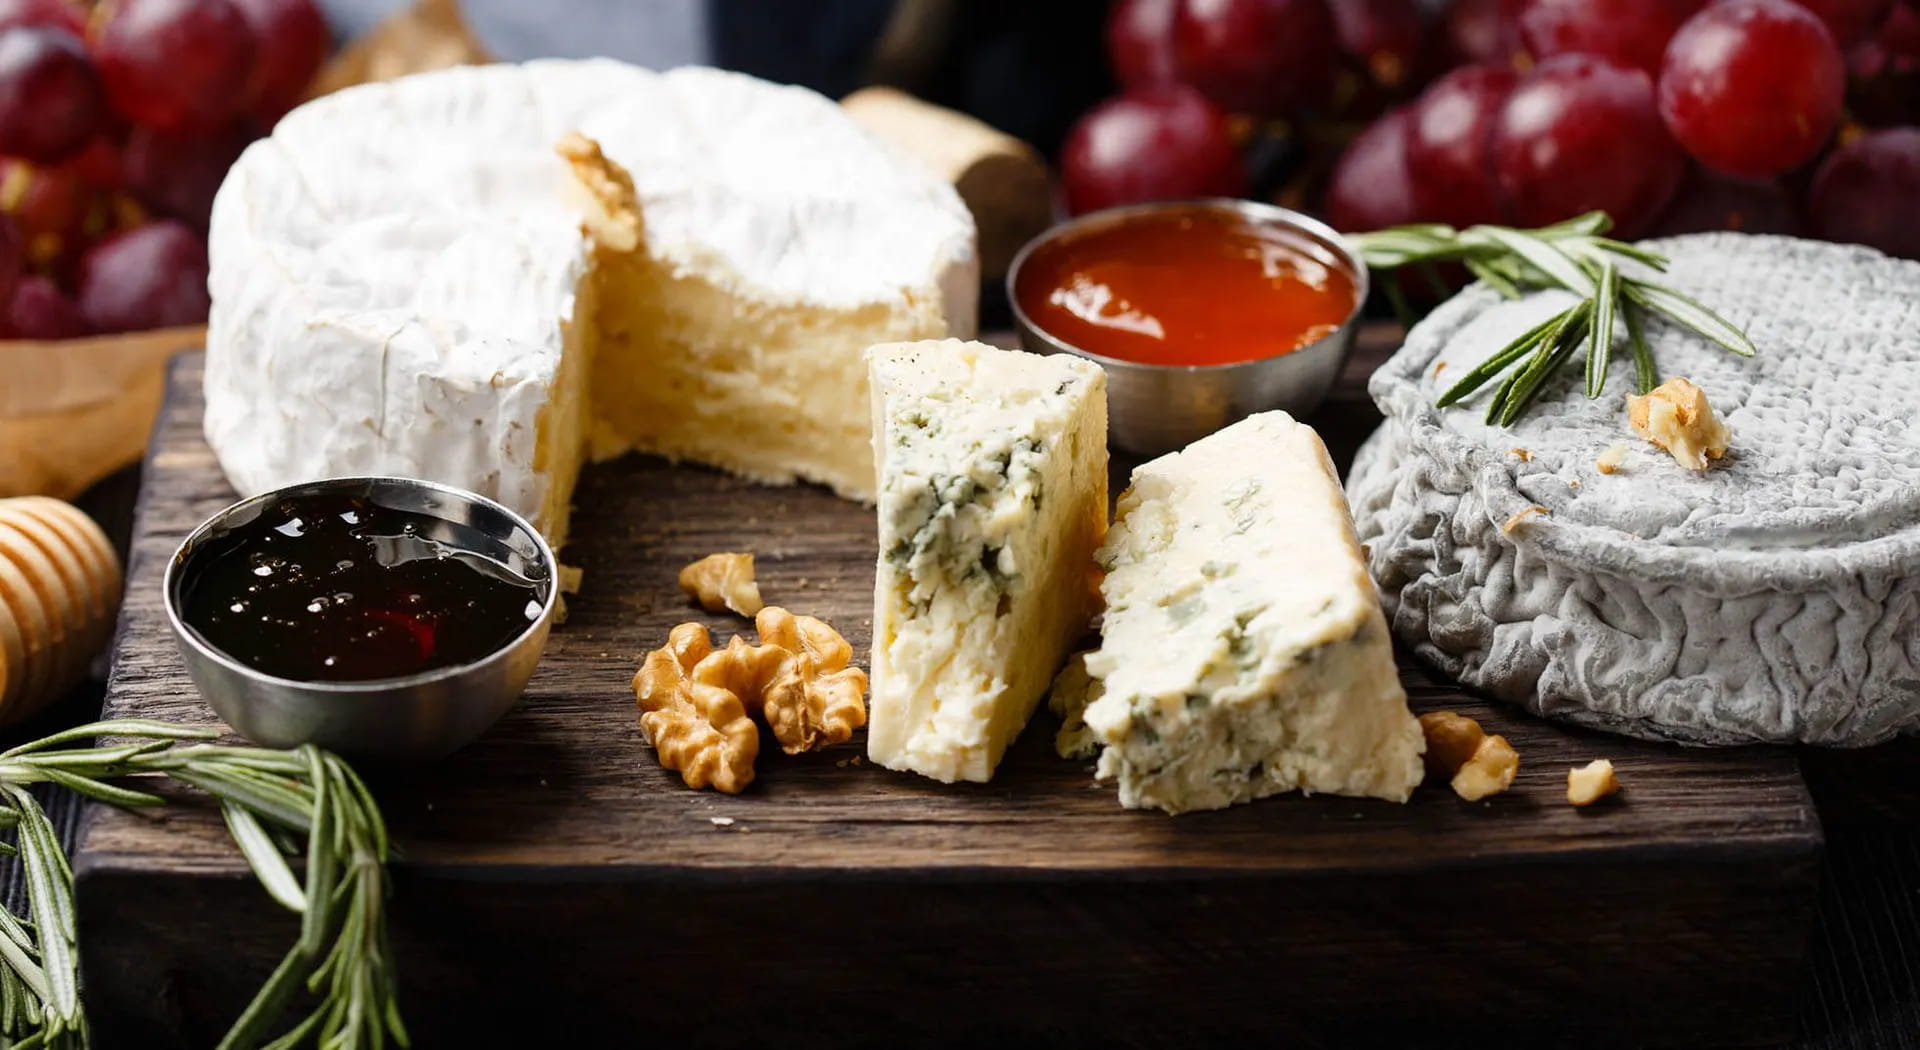 How to pair cheeses with jams